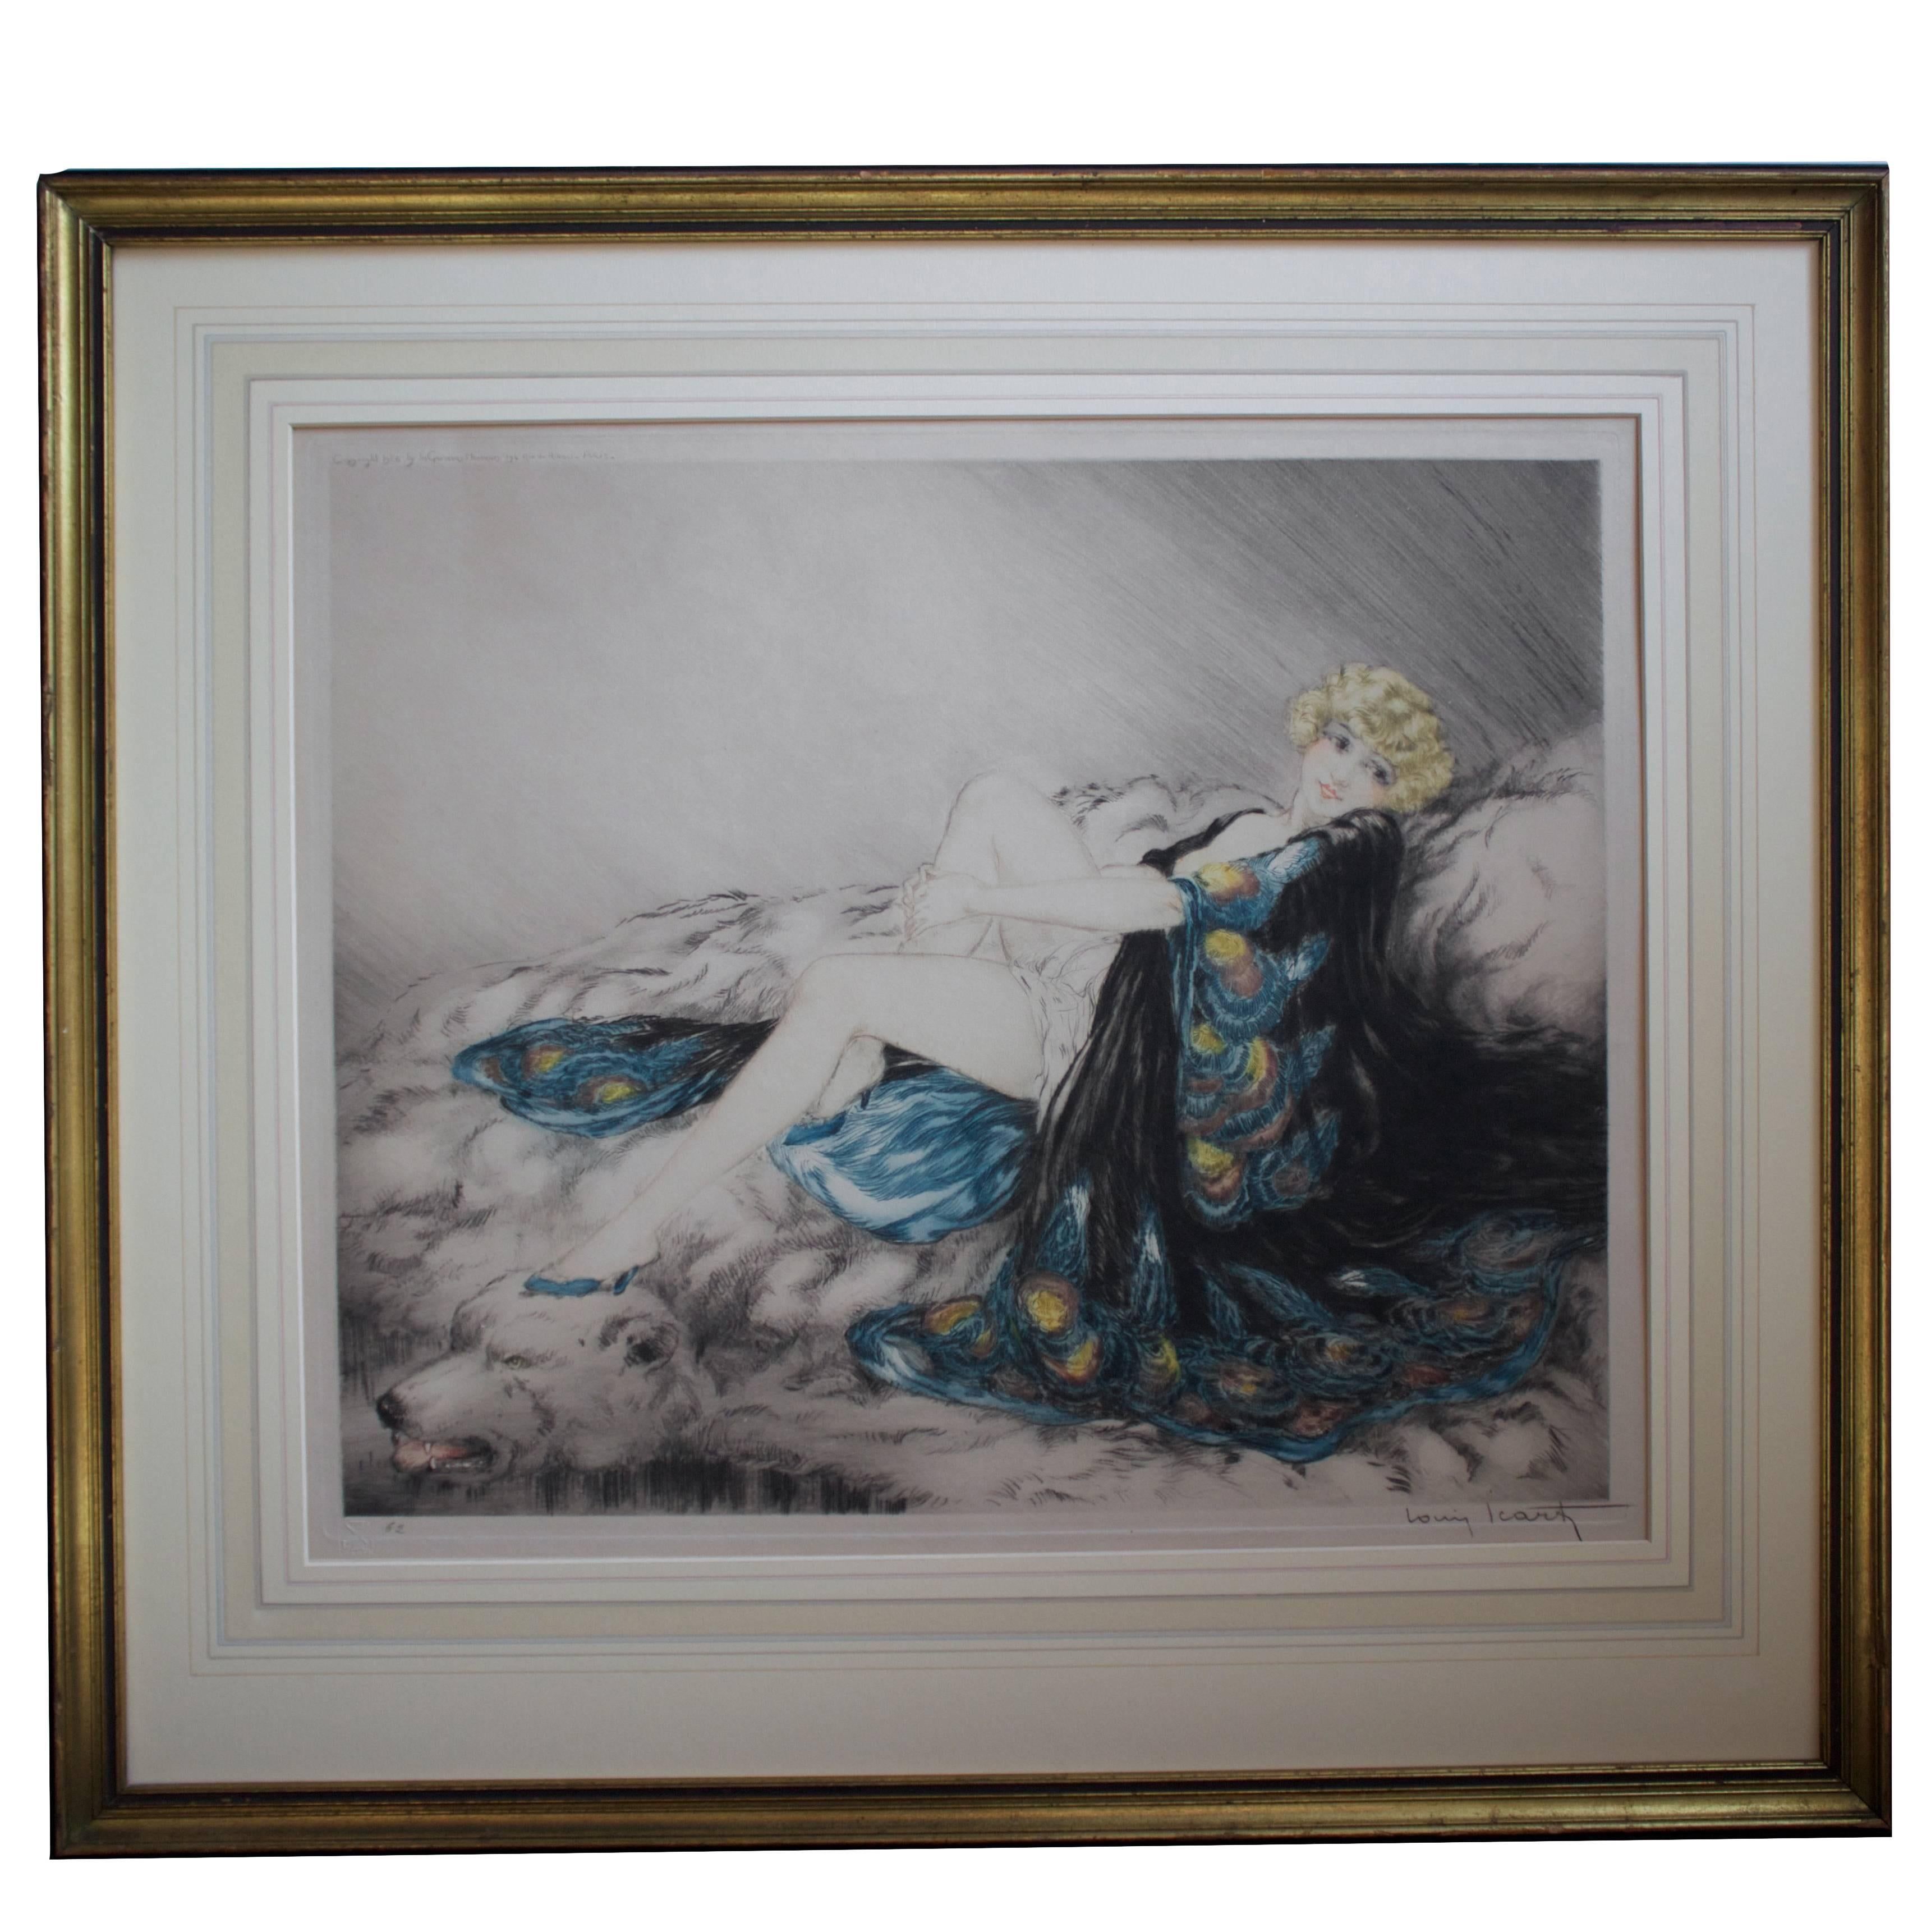 French Hand Signed Etching "La Robe de Chine/Silk Robe" by Louis Icart